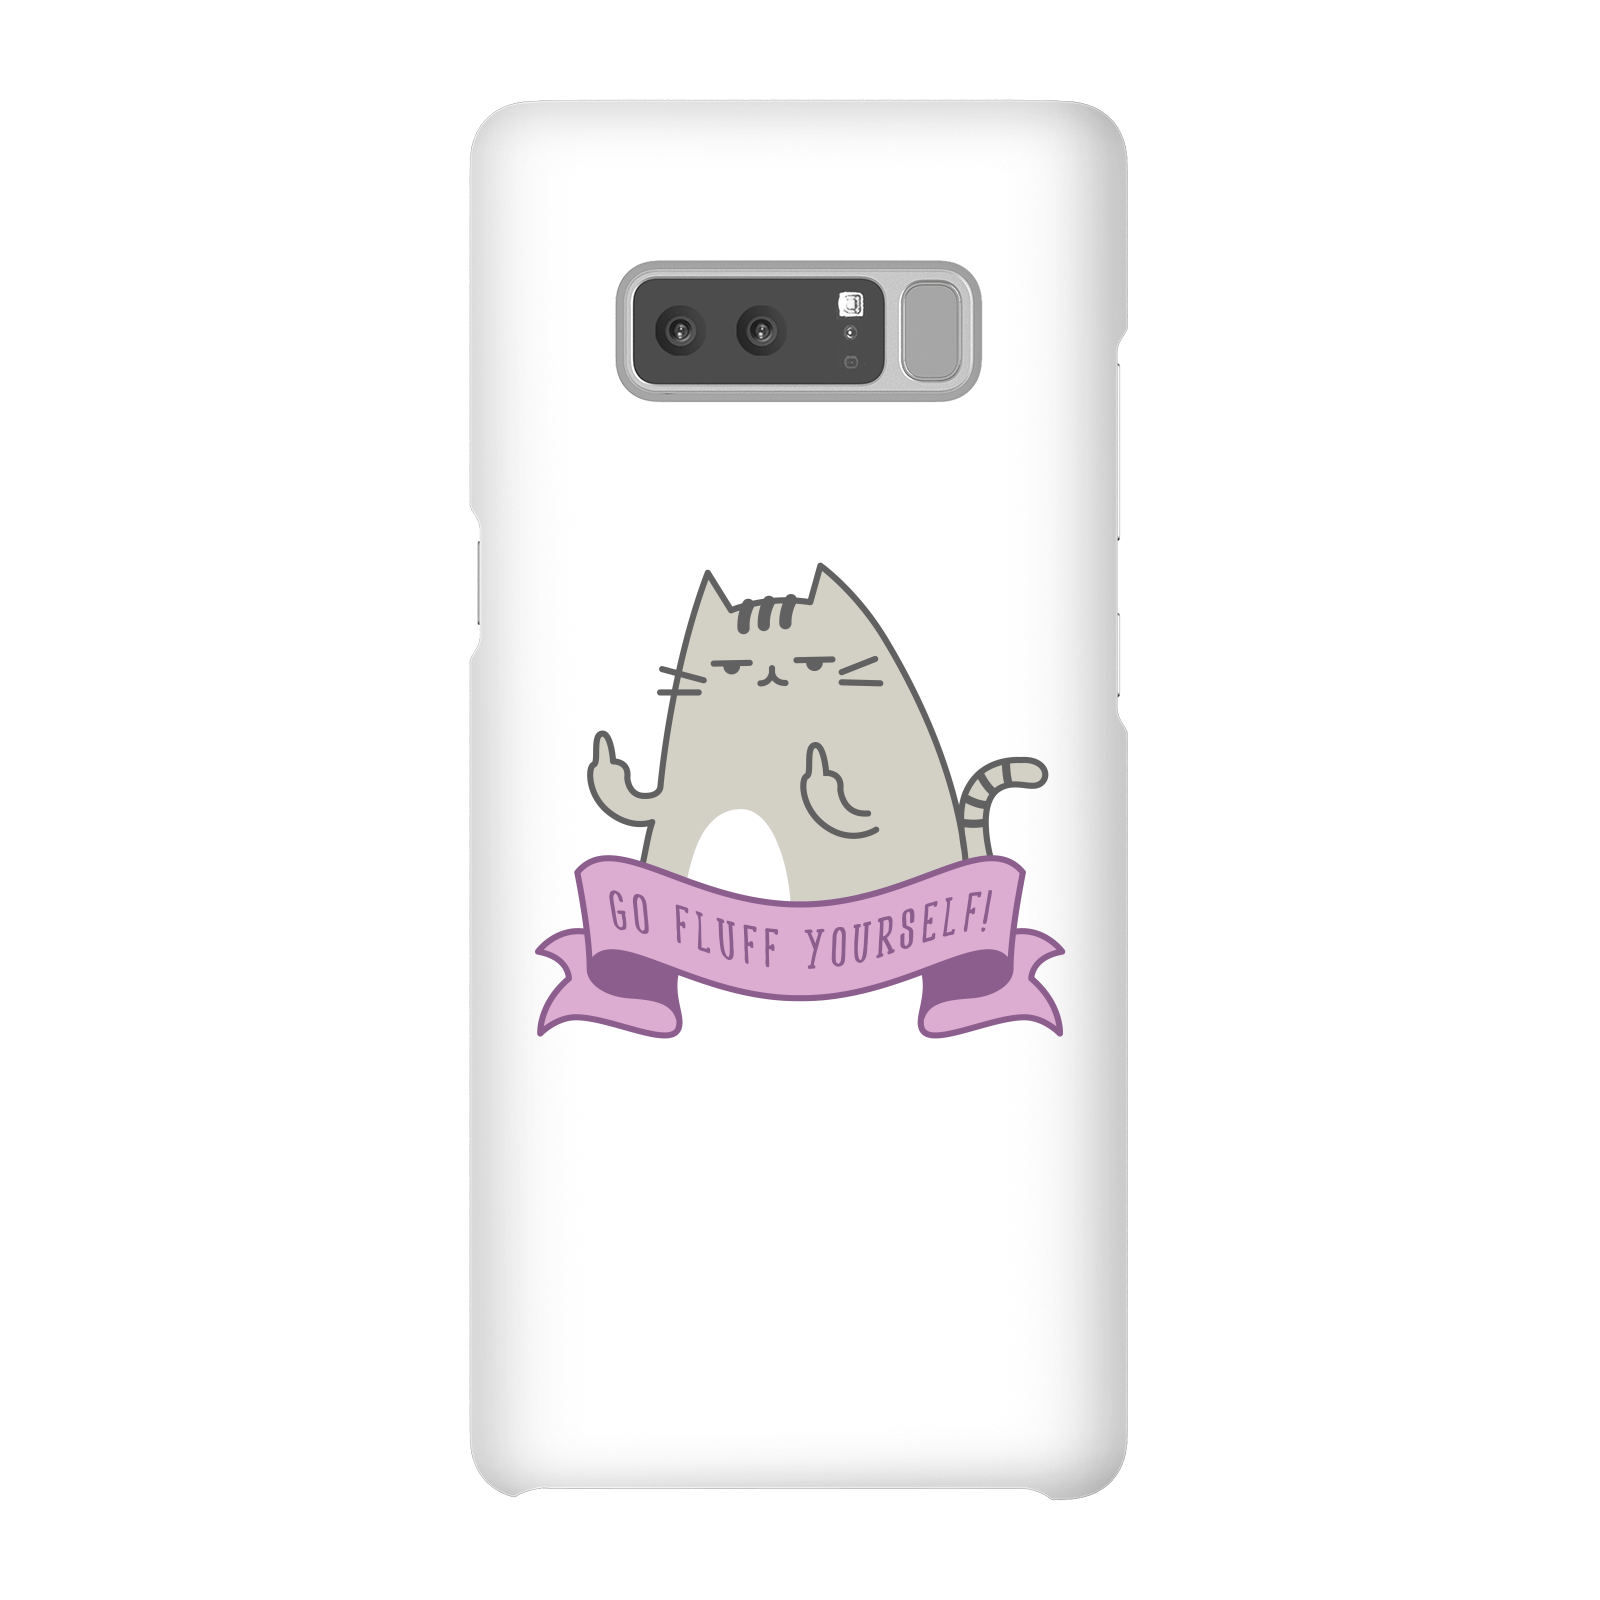 Go Fluff Yourself! Phone Case for iPhone and Android - Samsung Note 8 - Snap Case - Matte